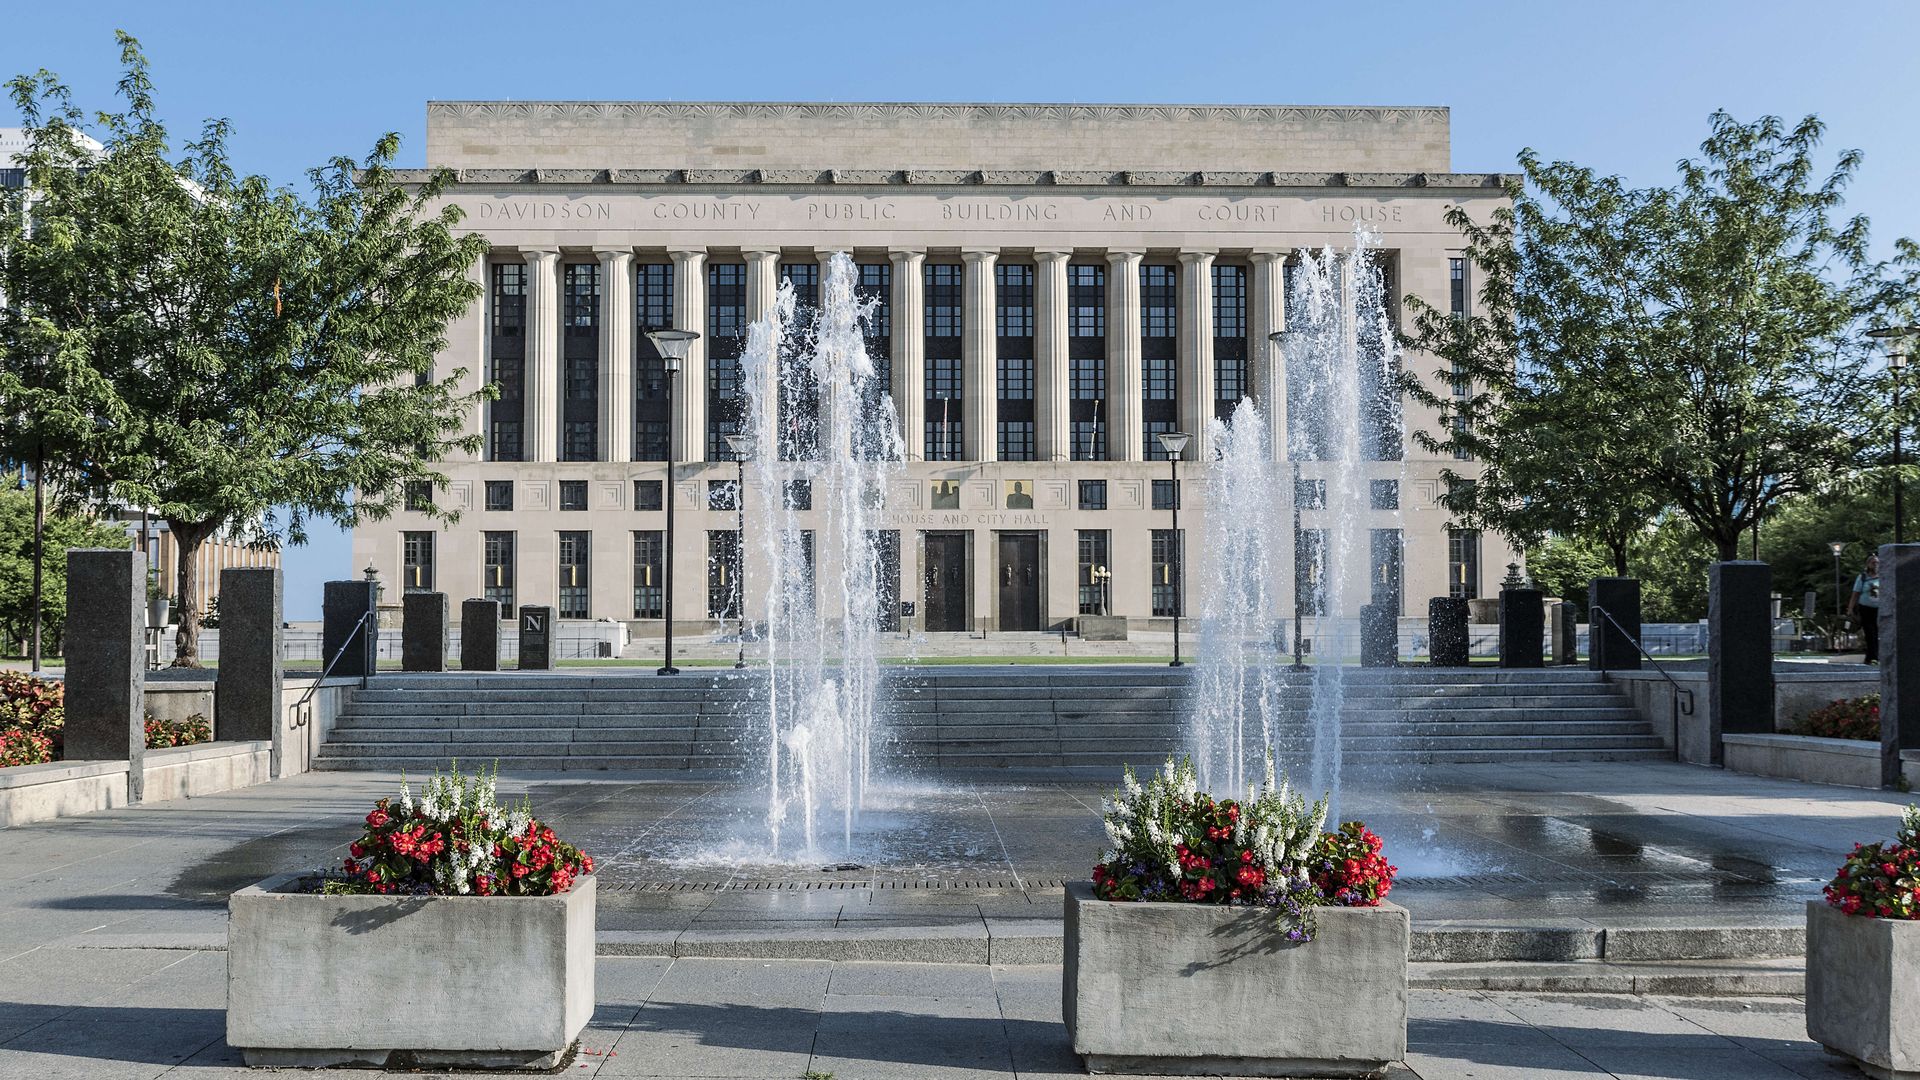 Nashville's city hall on a clear day with fountains surging outside.